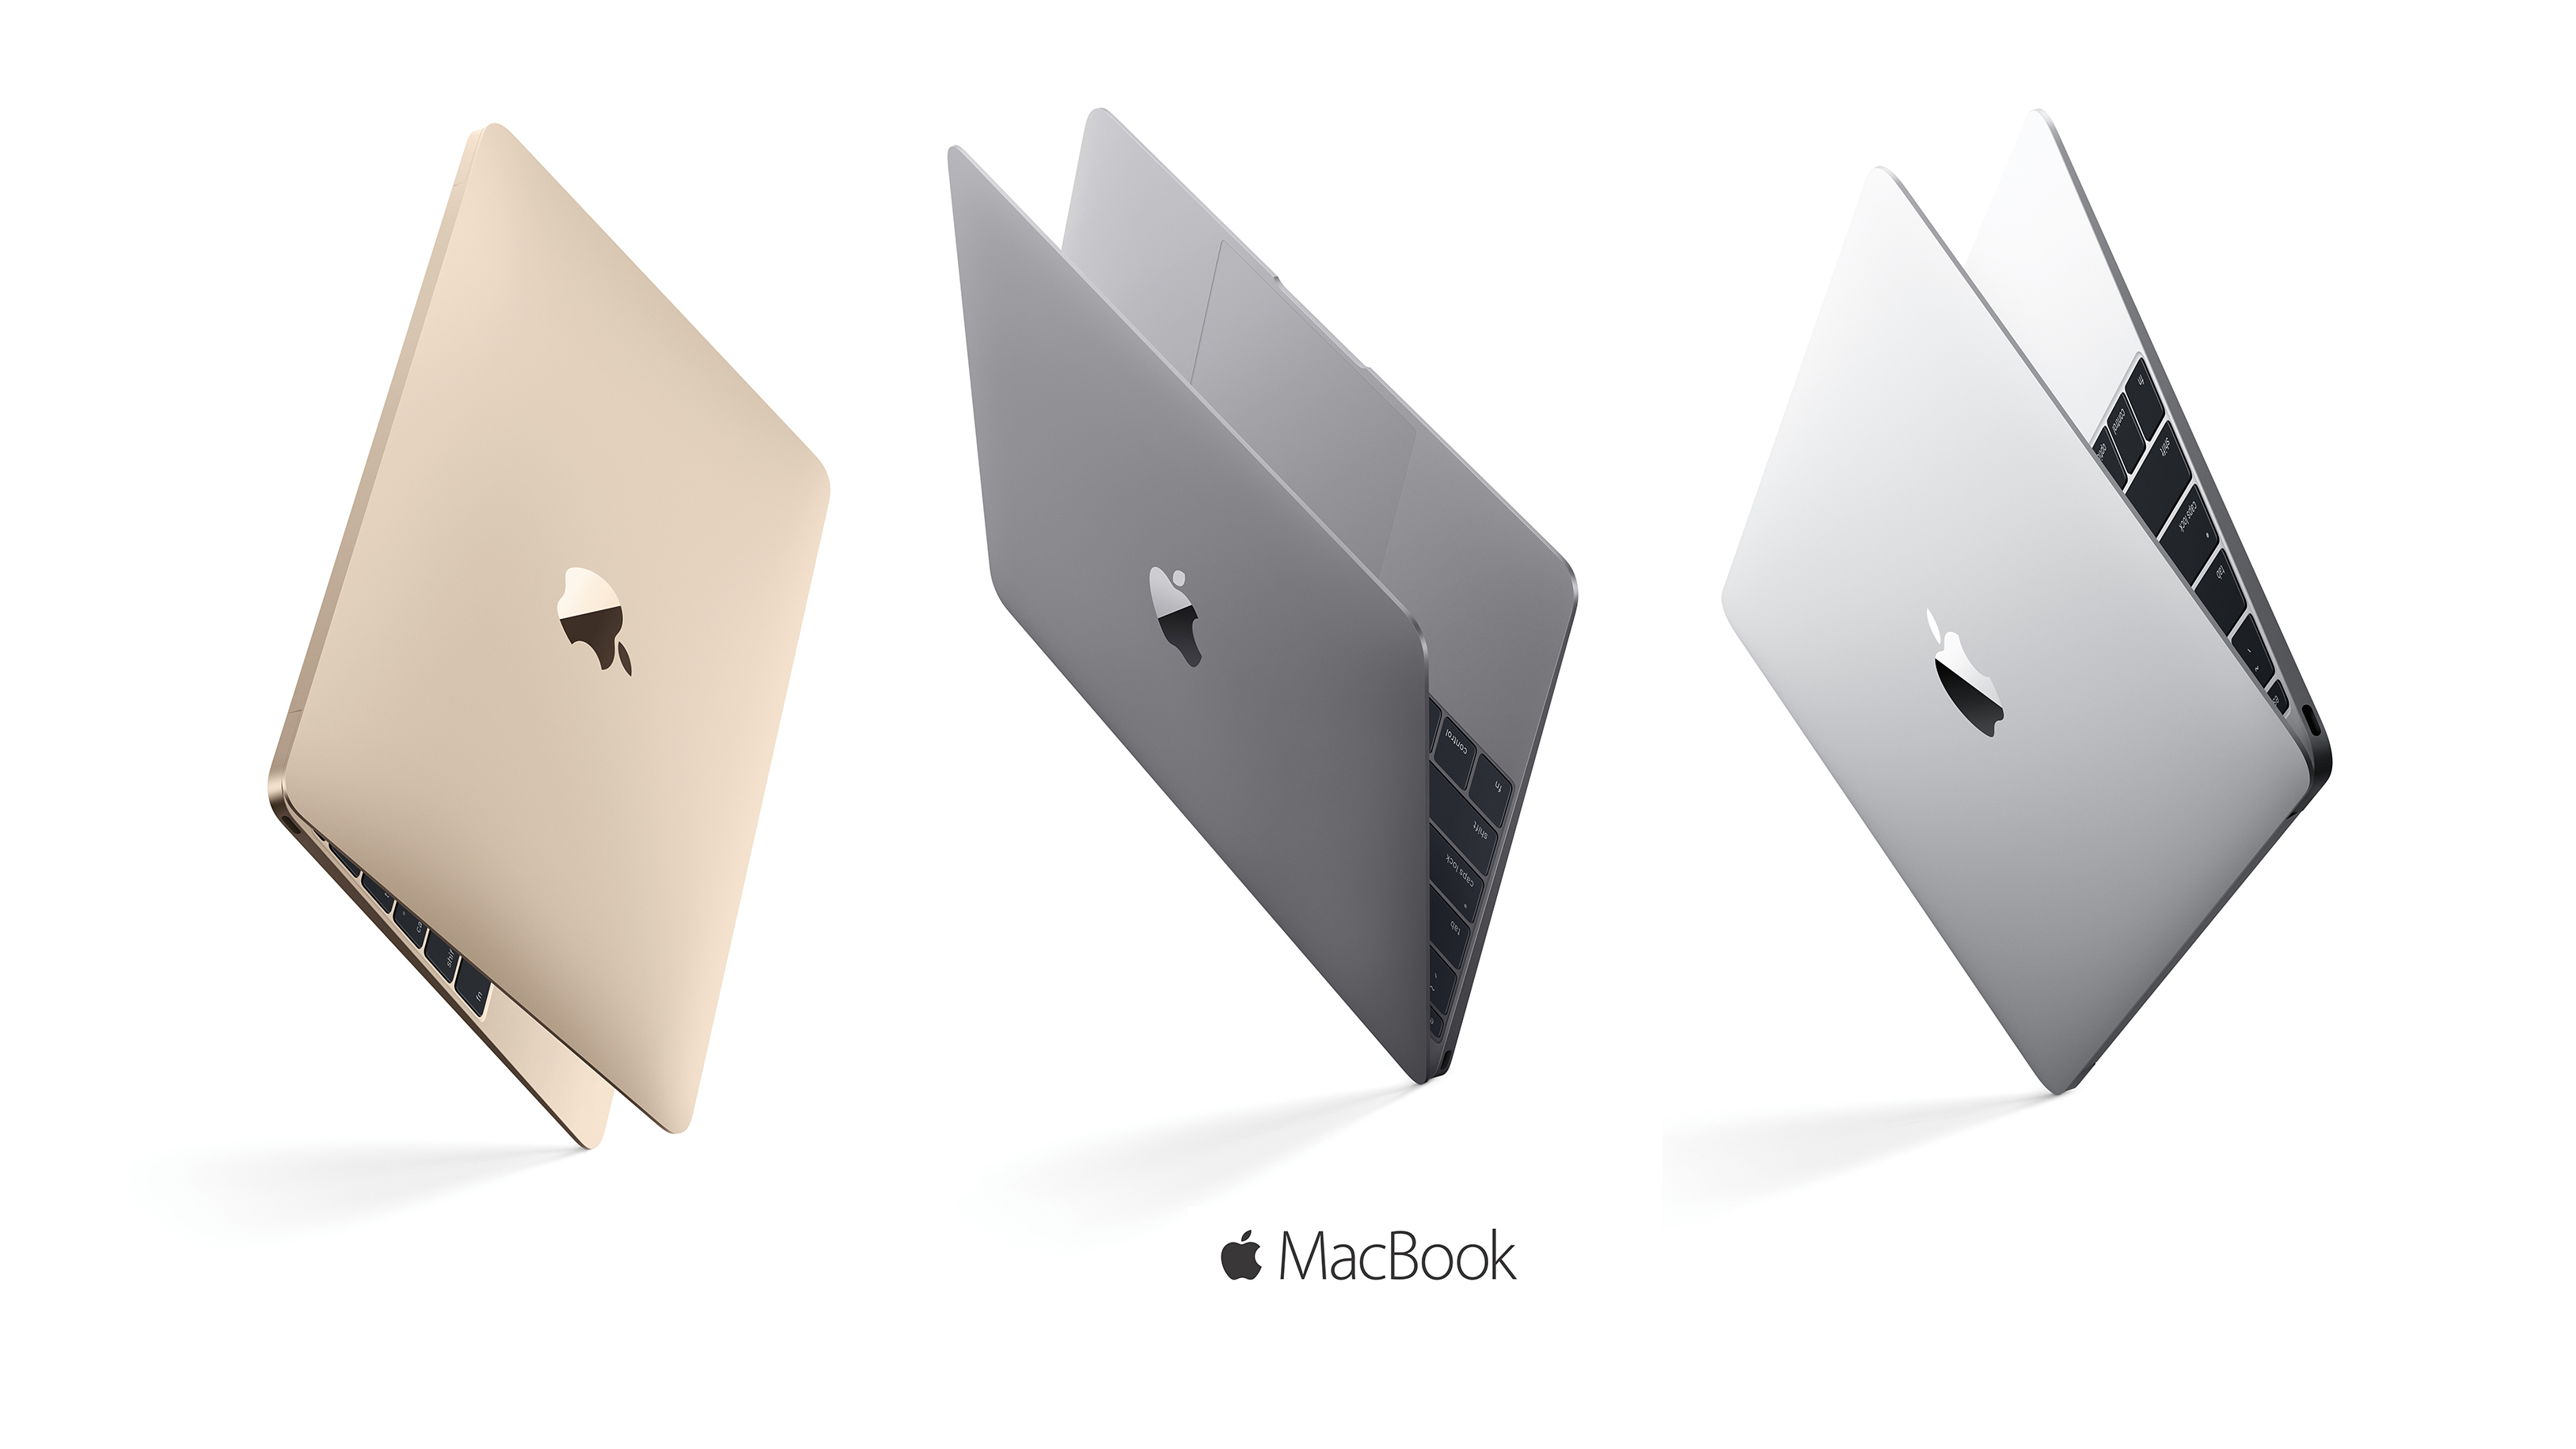 The 12-inch MacBook introduced in 2015 is now considered 'vintage